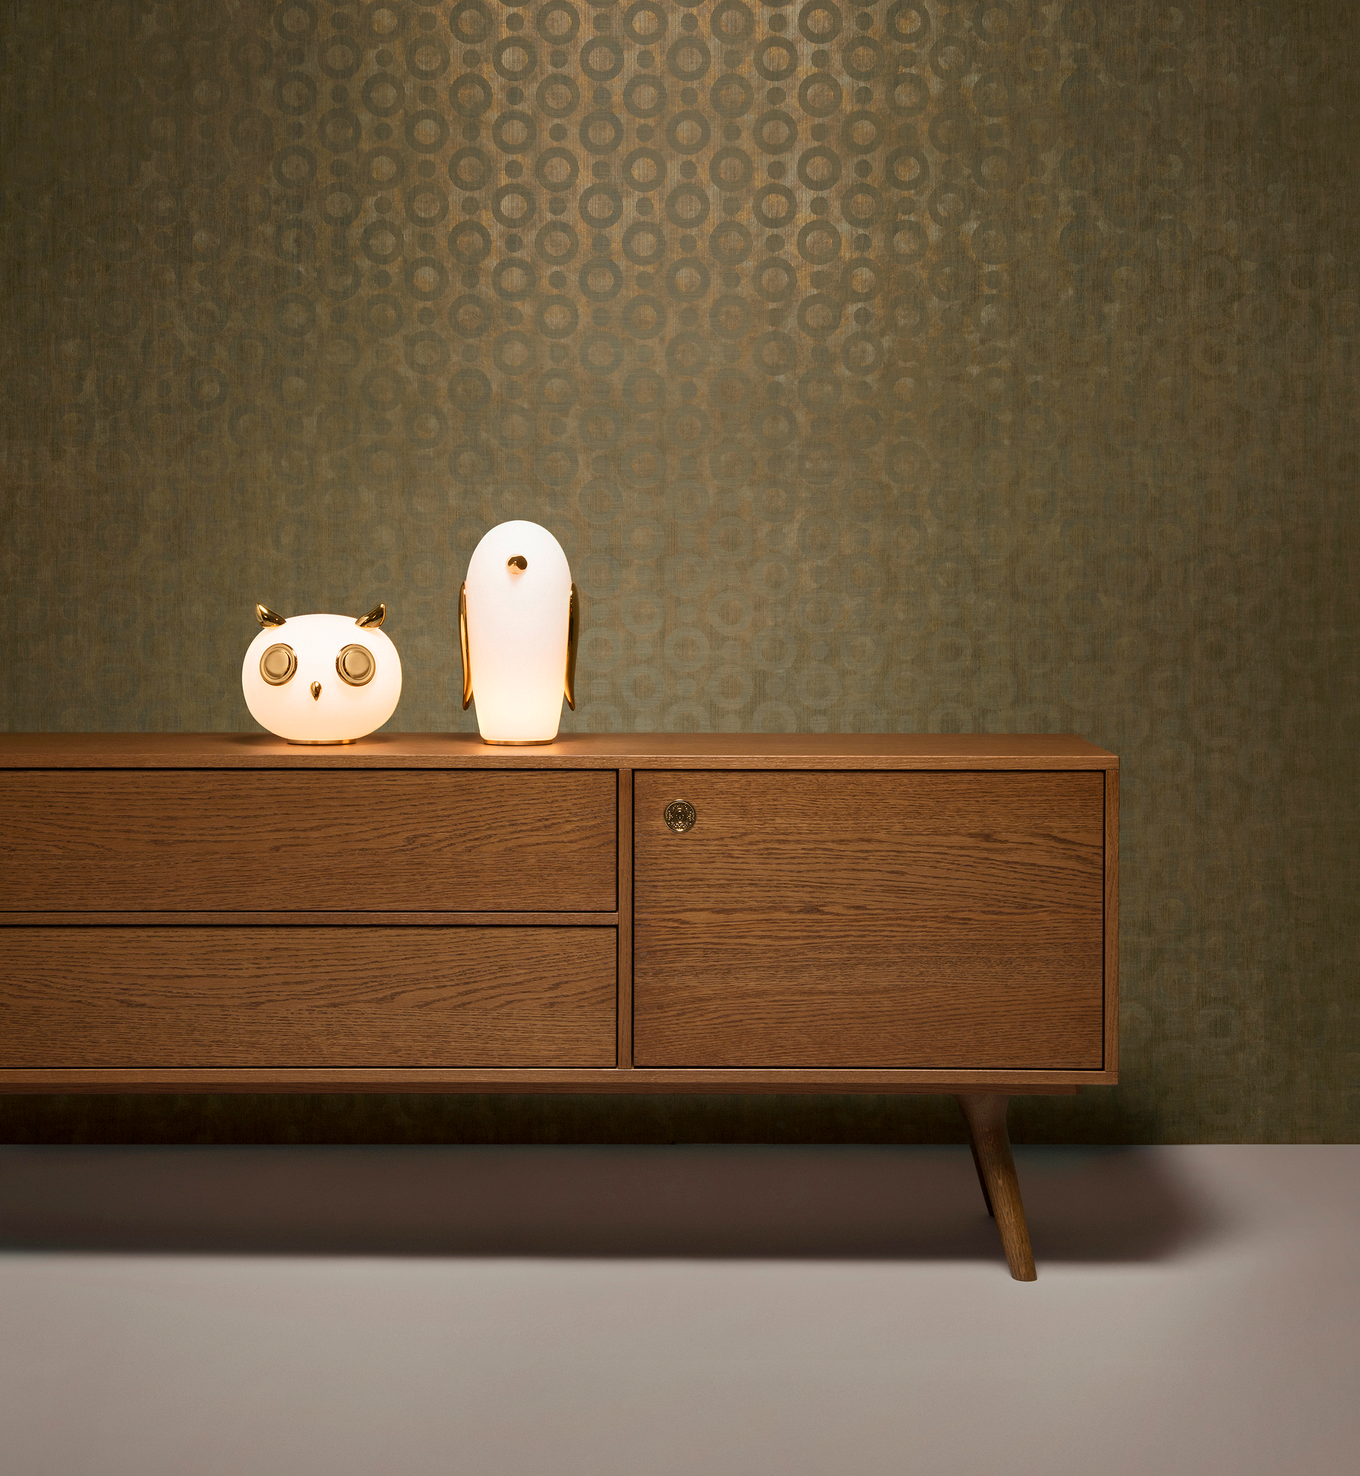 Poetic composition Pet Light Uhuh, Pet Light Noot Noot, Zio Buffet and Moooi Wallcovering